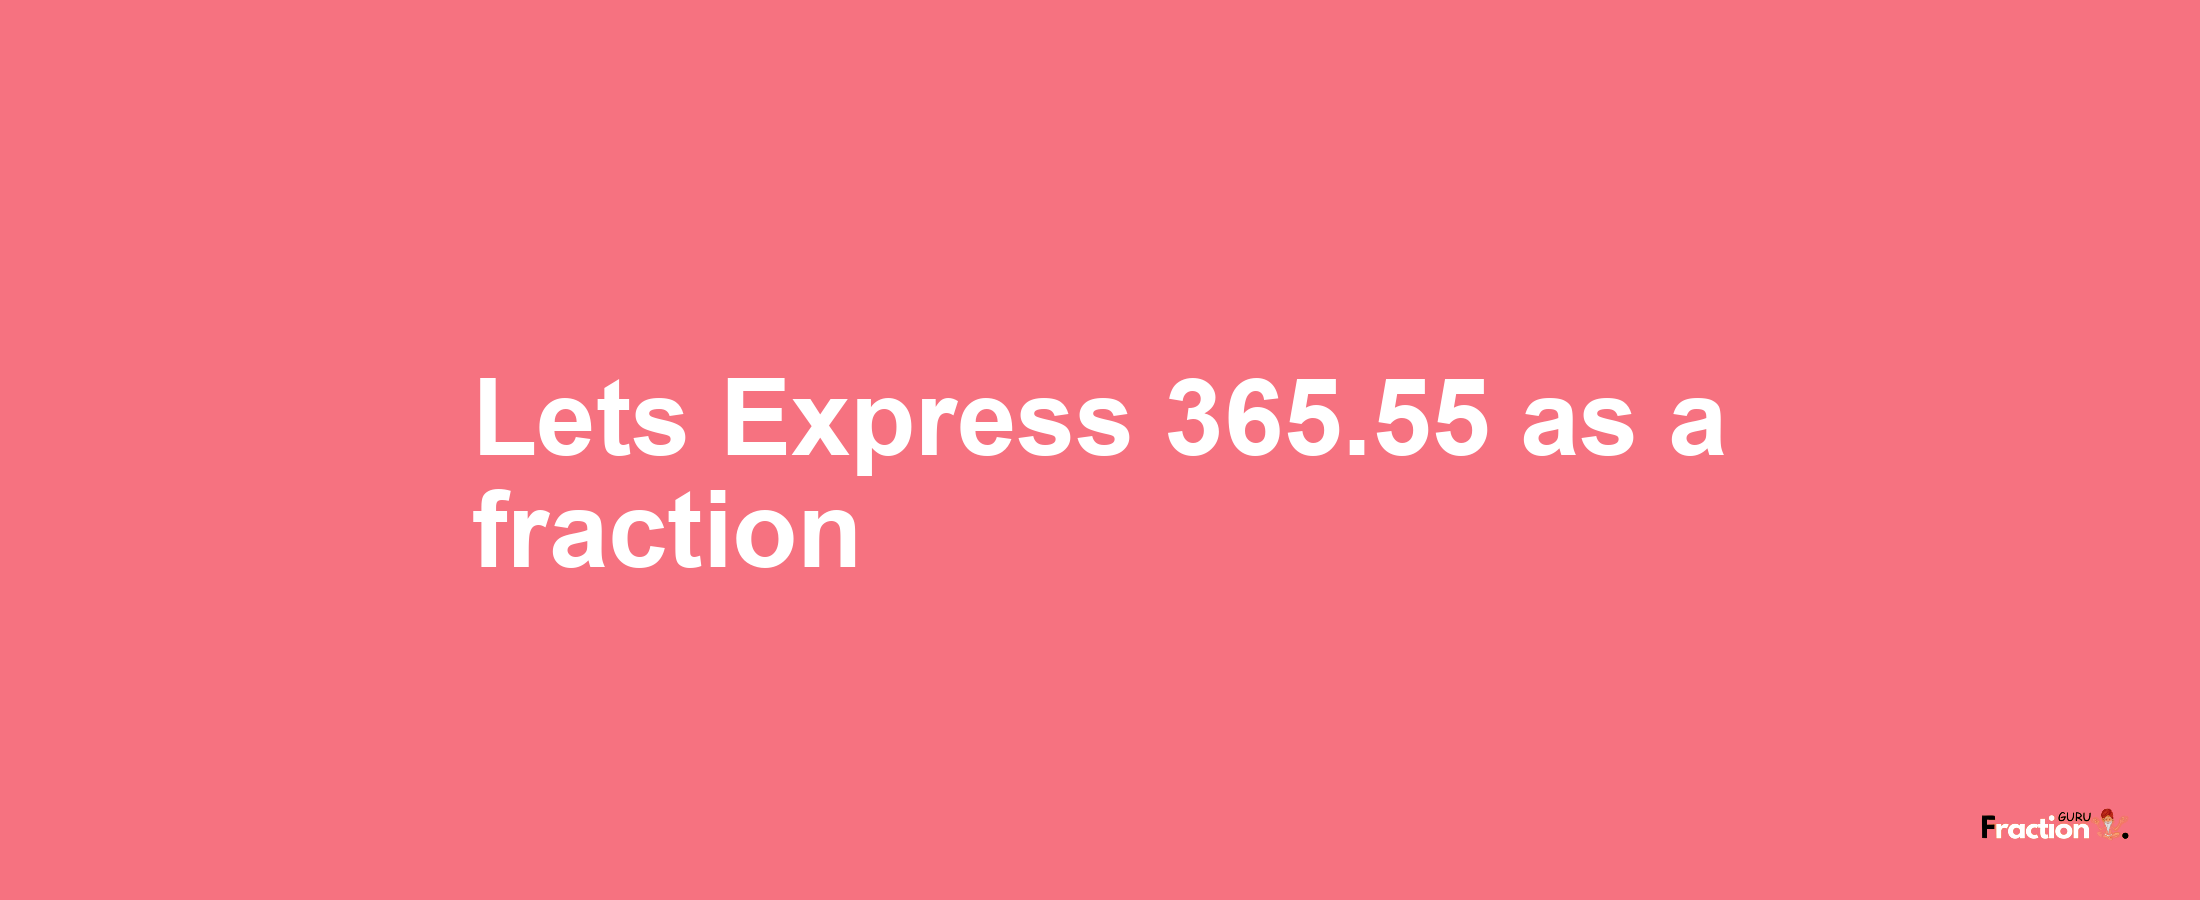 Lets Express 365.55 as afraction